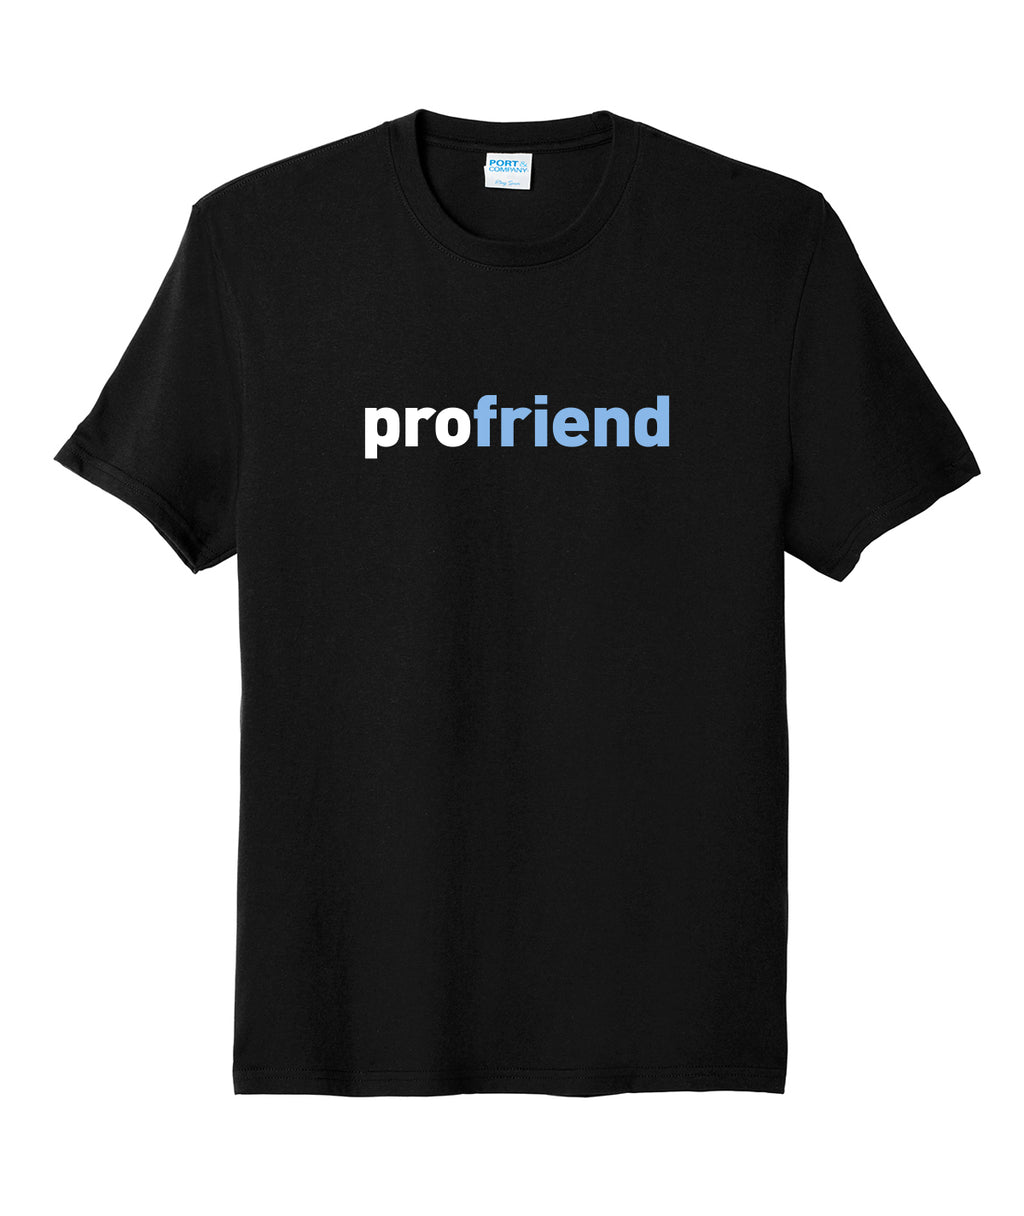 Profriend Youth Soft Tee